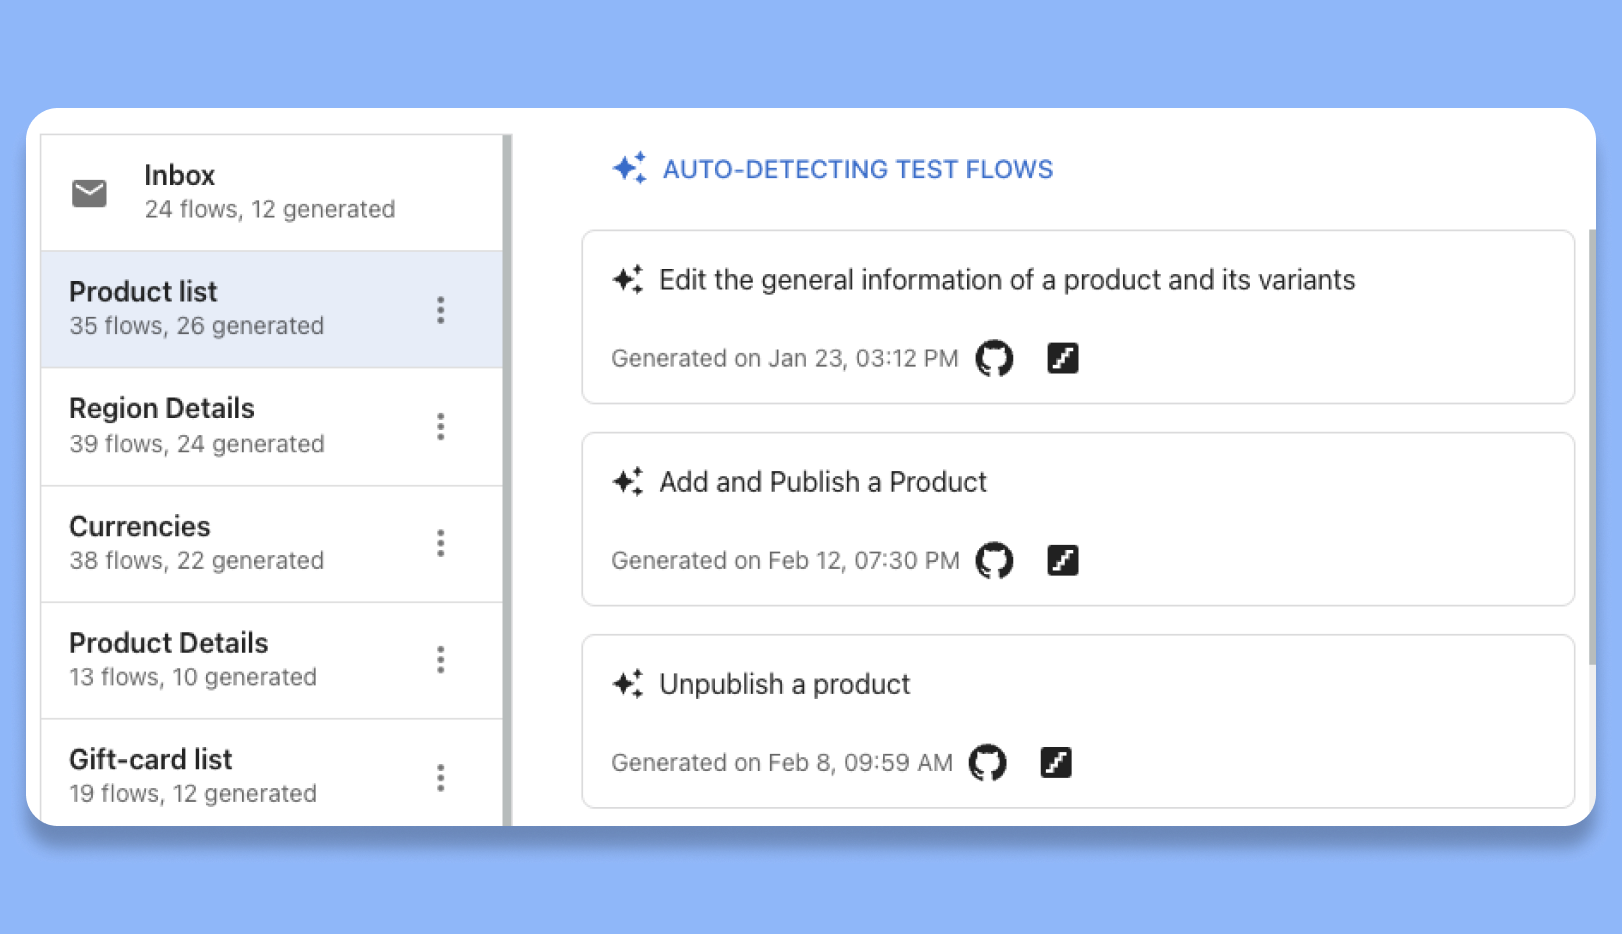 Automatically detect test flows using AI